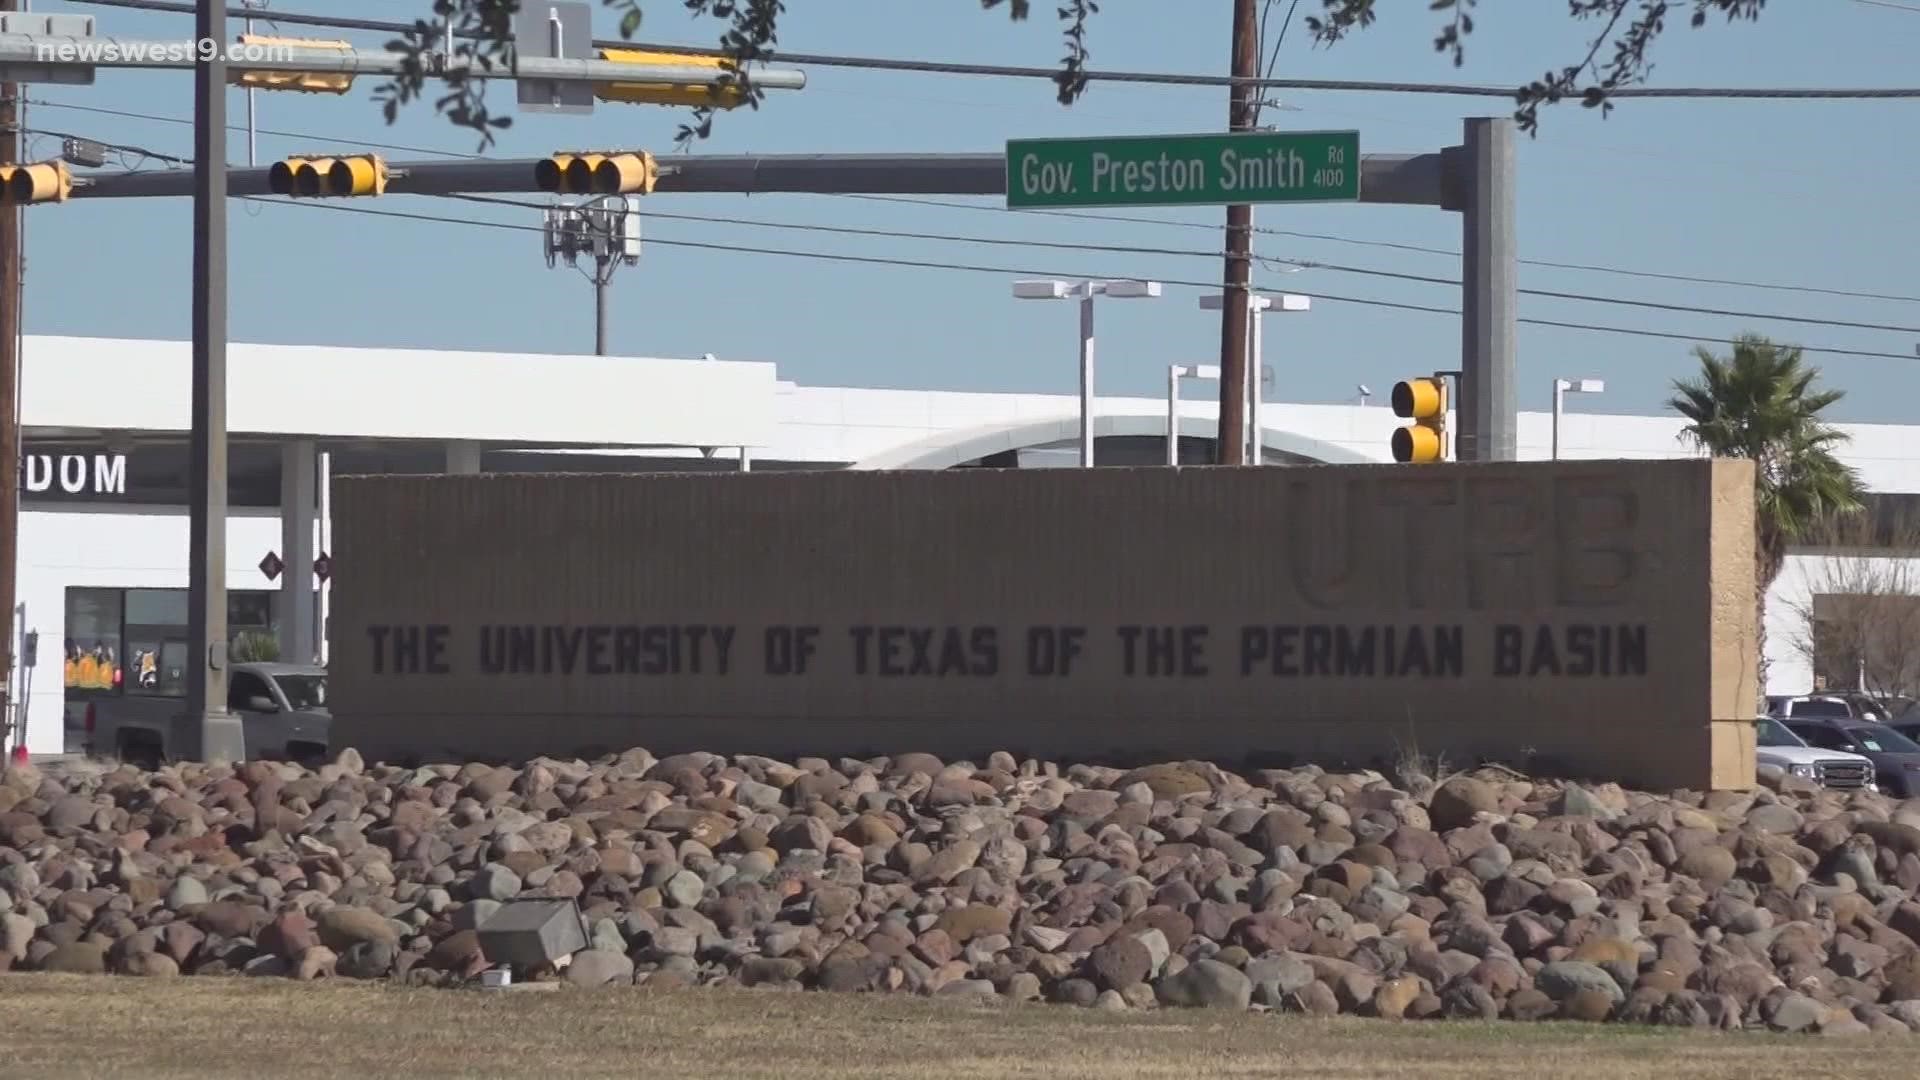 The staff member has been cleared of any wrongdoing and will be reinstated, according to a UTPB spokesperson.